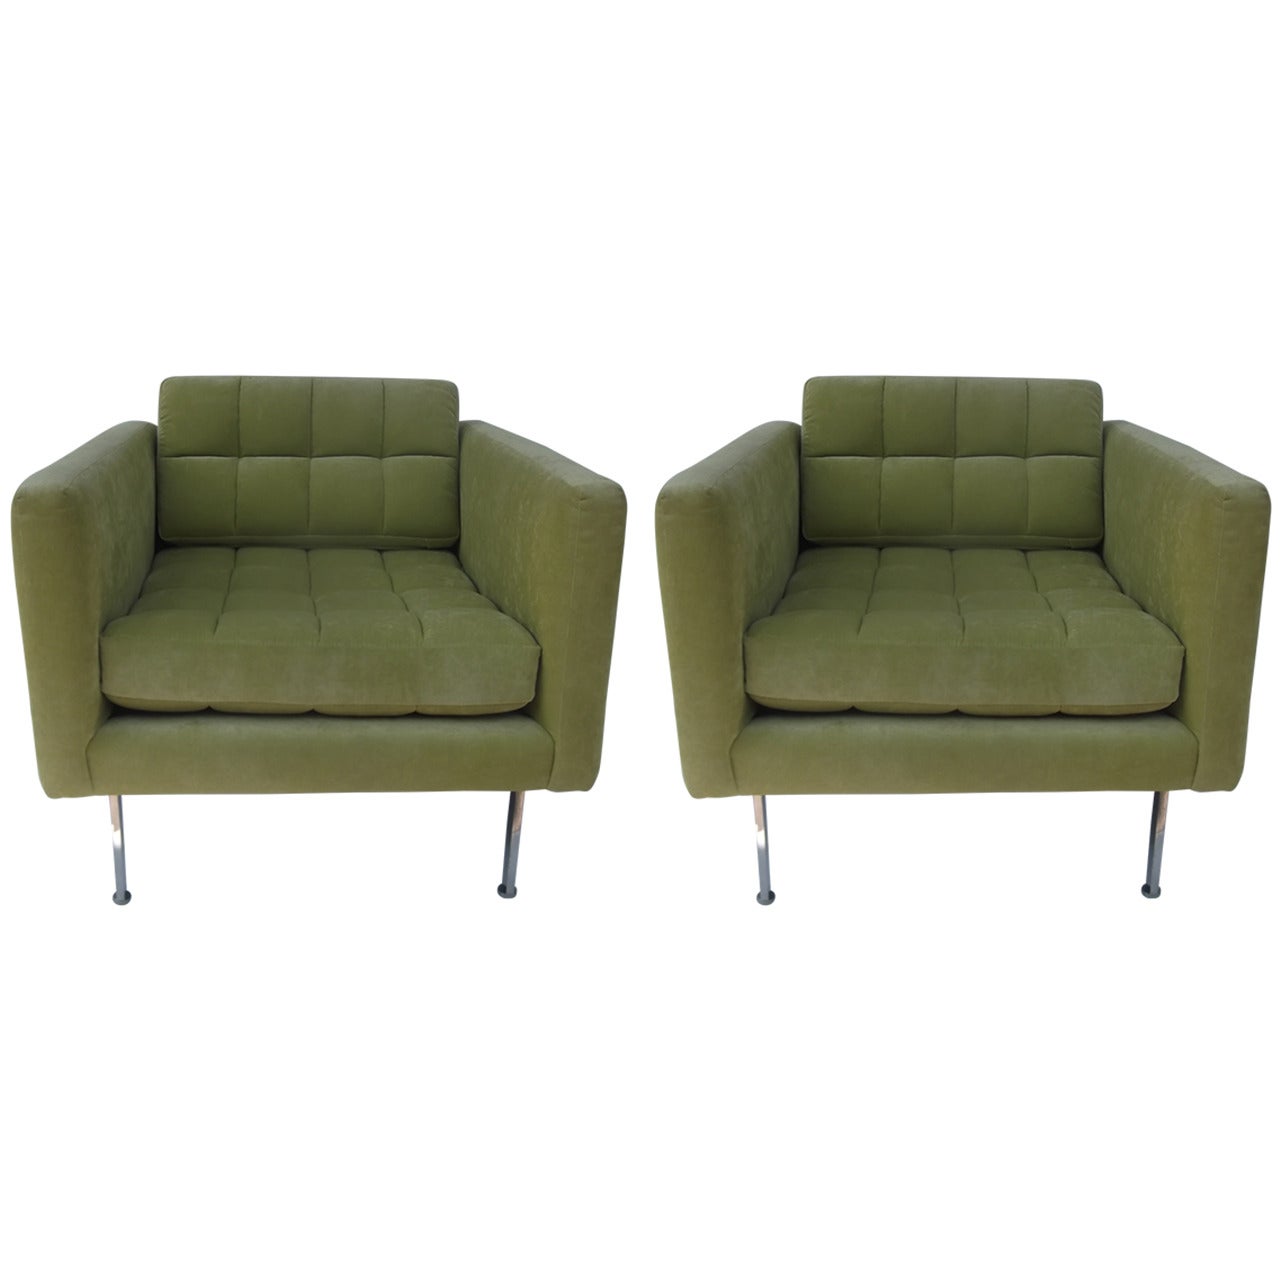 Pair of Key Lime 'Cube" Club Chairs Authentic Harvey Probber